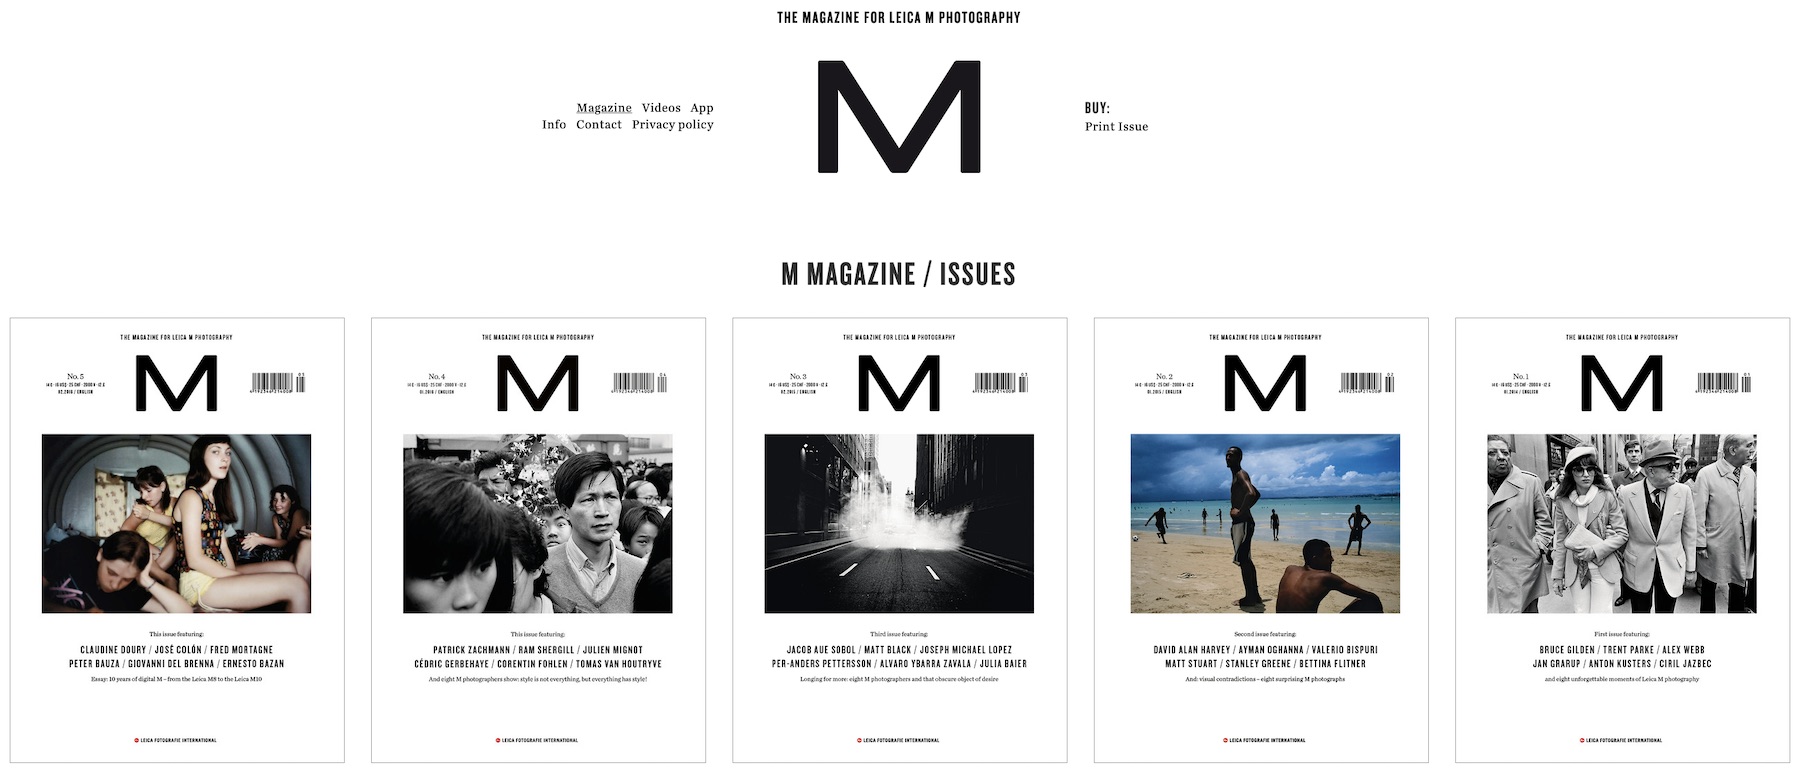 Leica M-Magazine now available for free – Leica Rumors